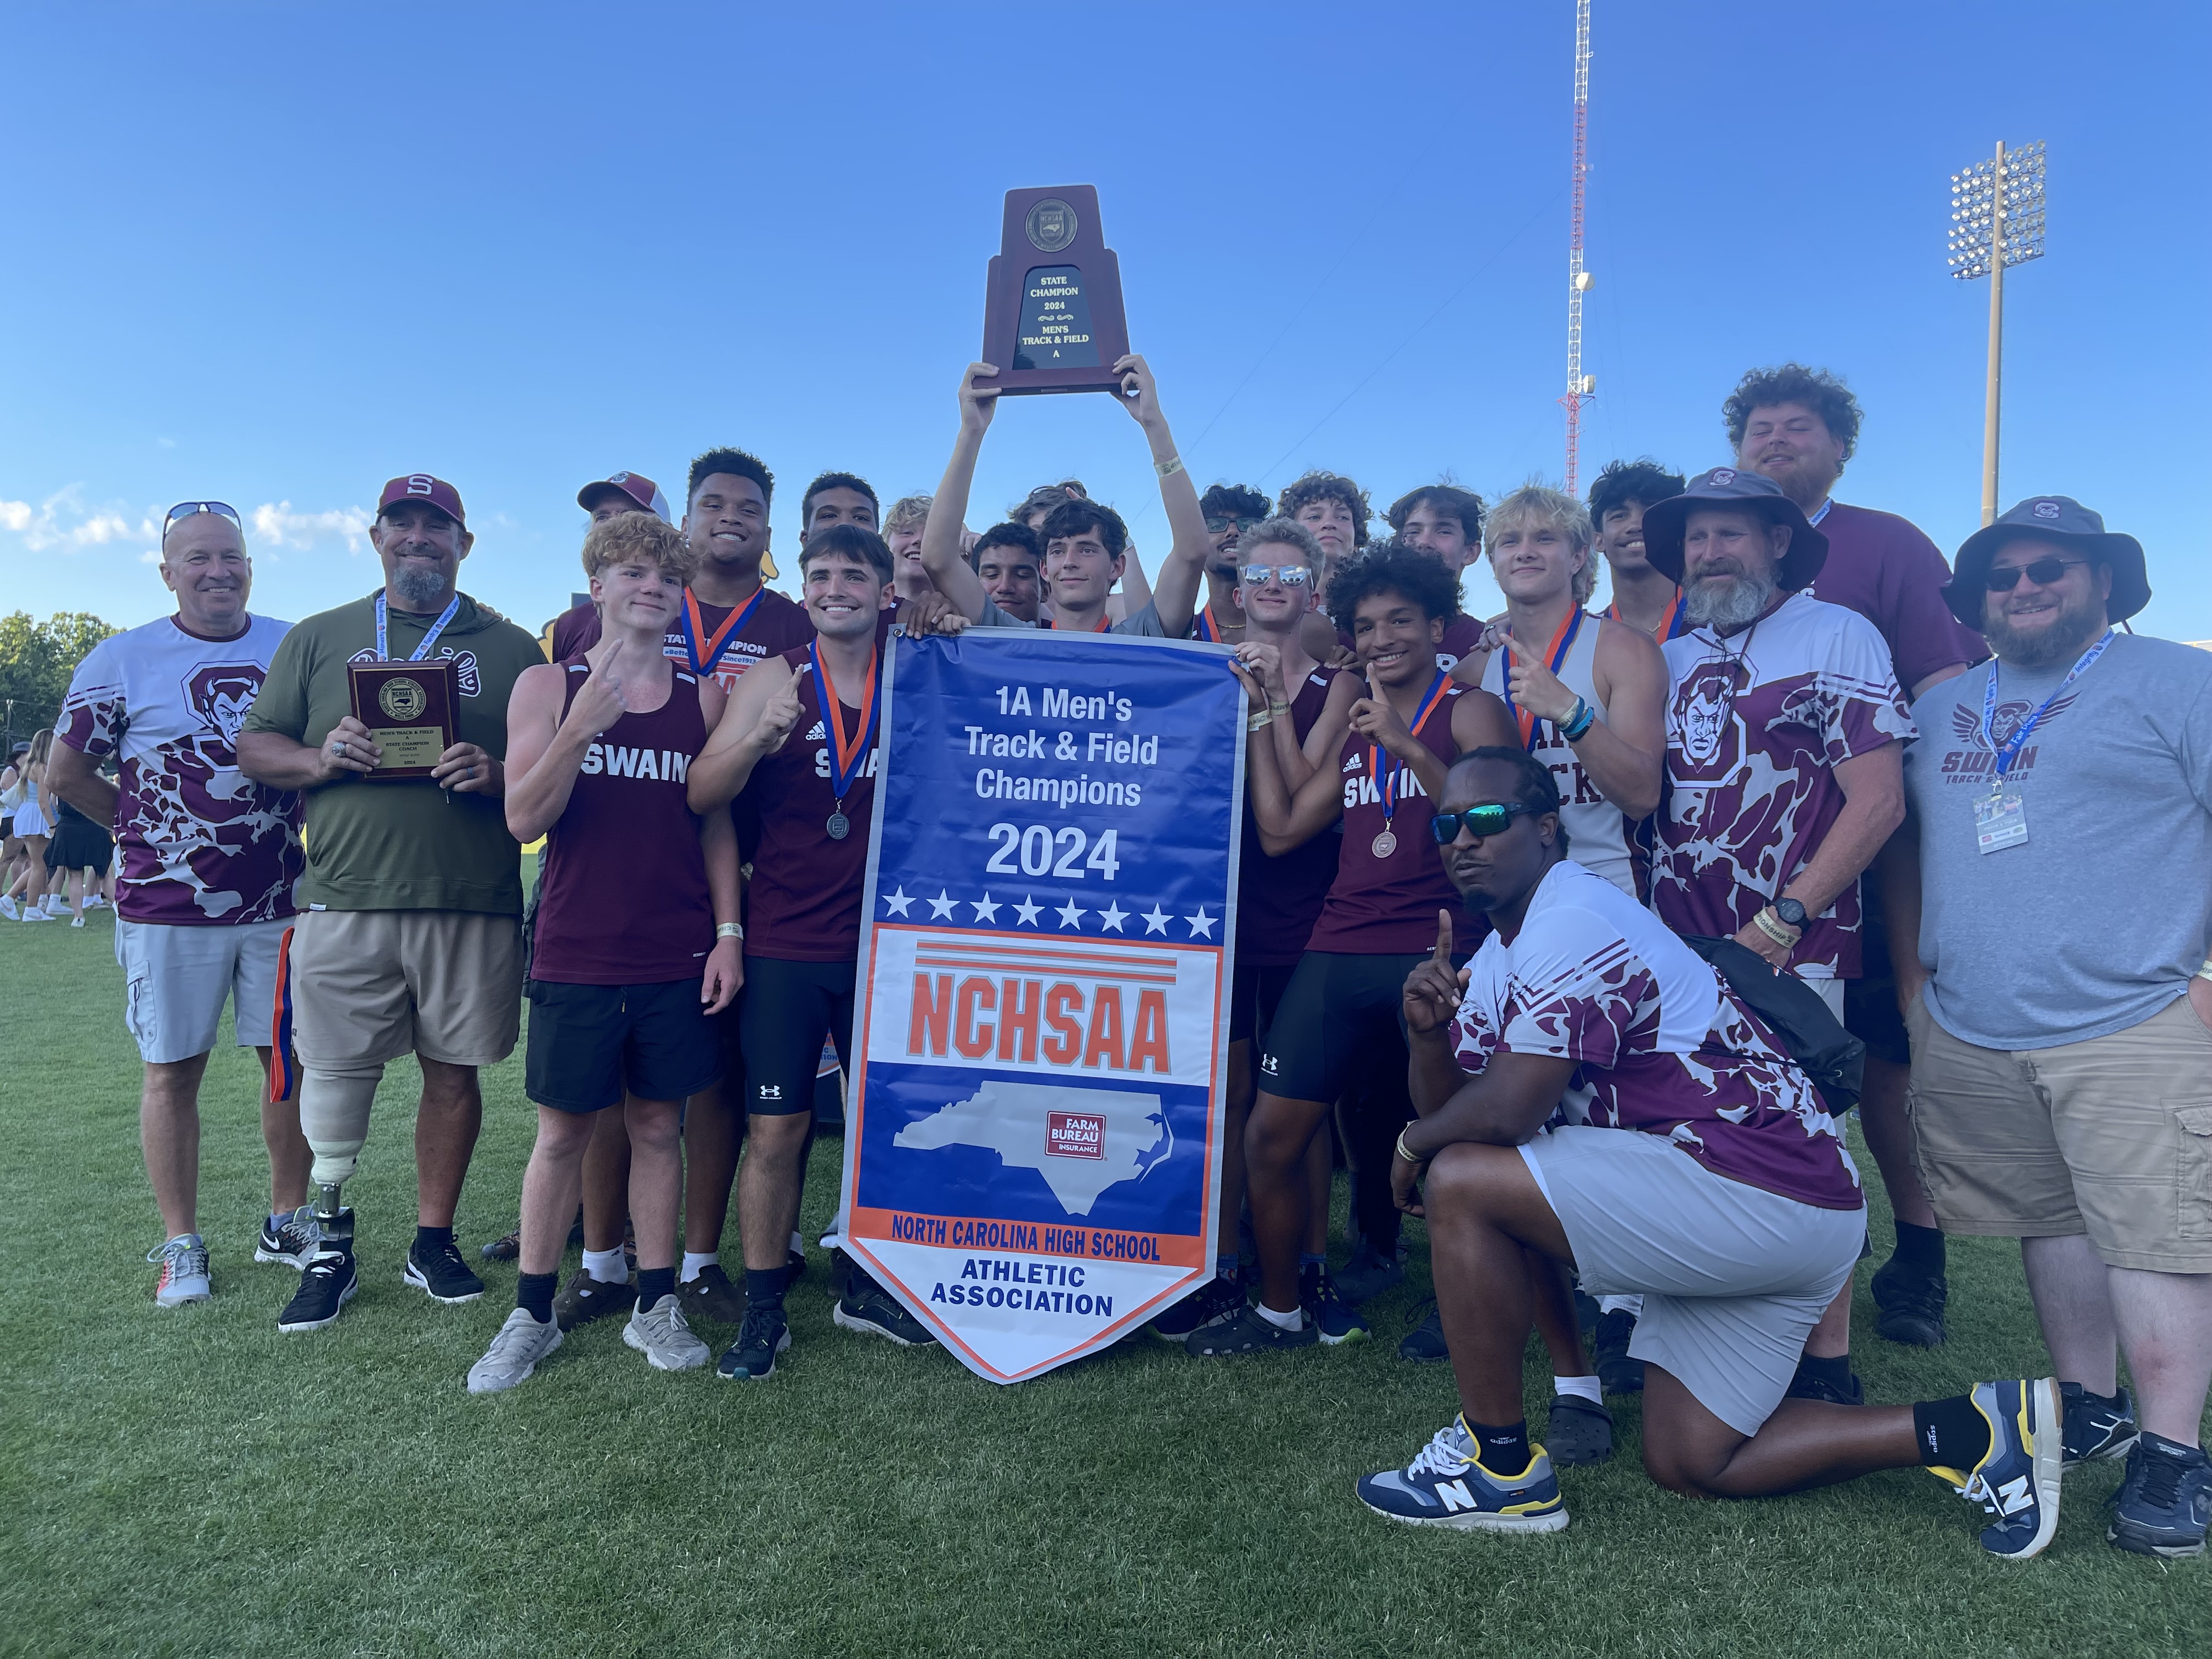 Swain Maroon Devils secured the 2024 NCHSAA 1A track and field championship title on Monday. The 4x400 meter relay team won first place. Nse Uffort took first in shot-put and Owen Craig took third in pole vault. 